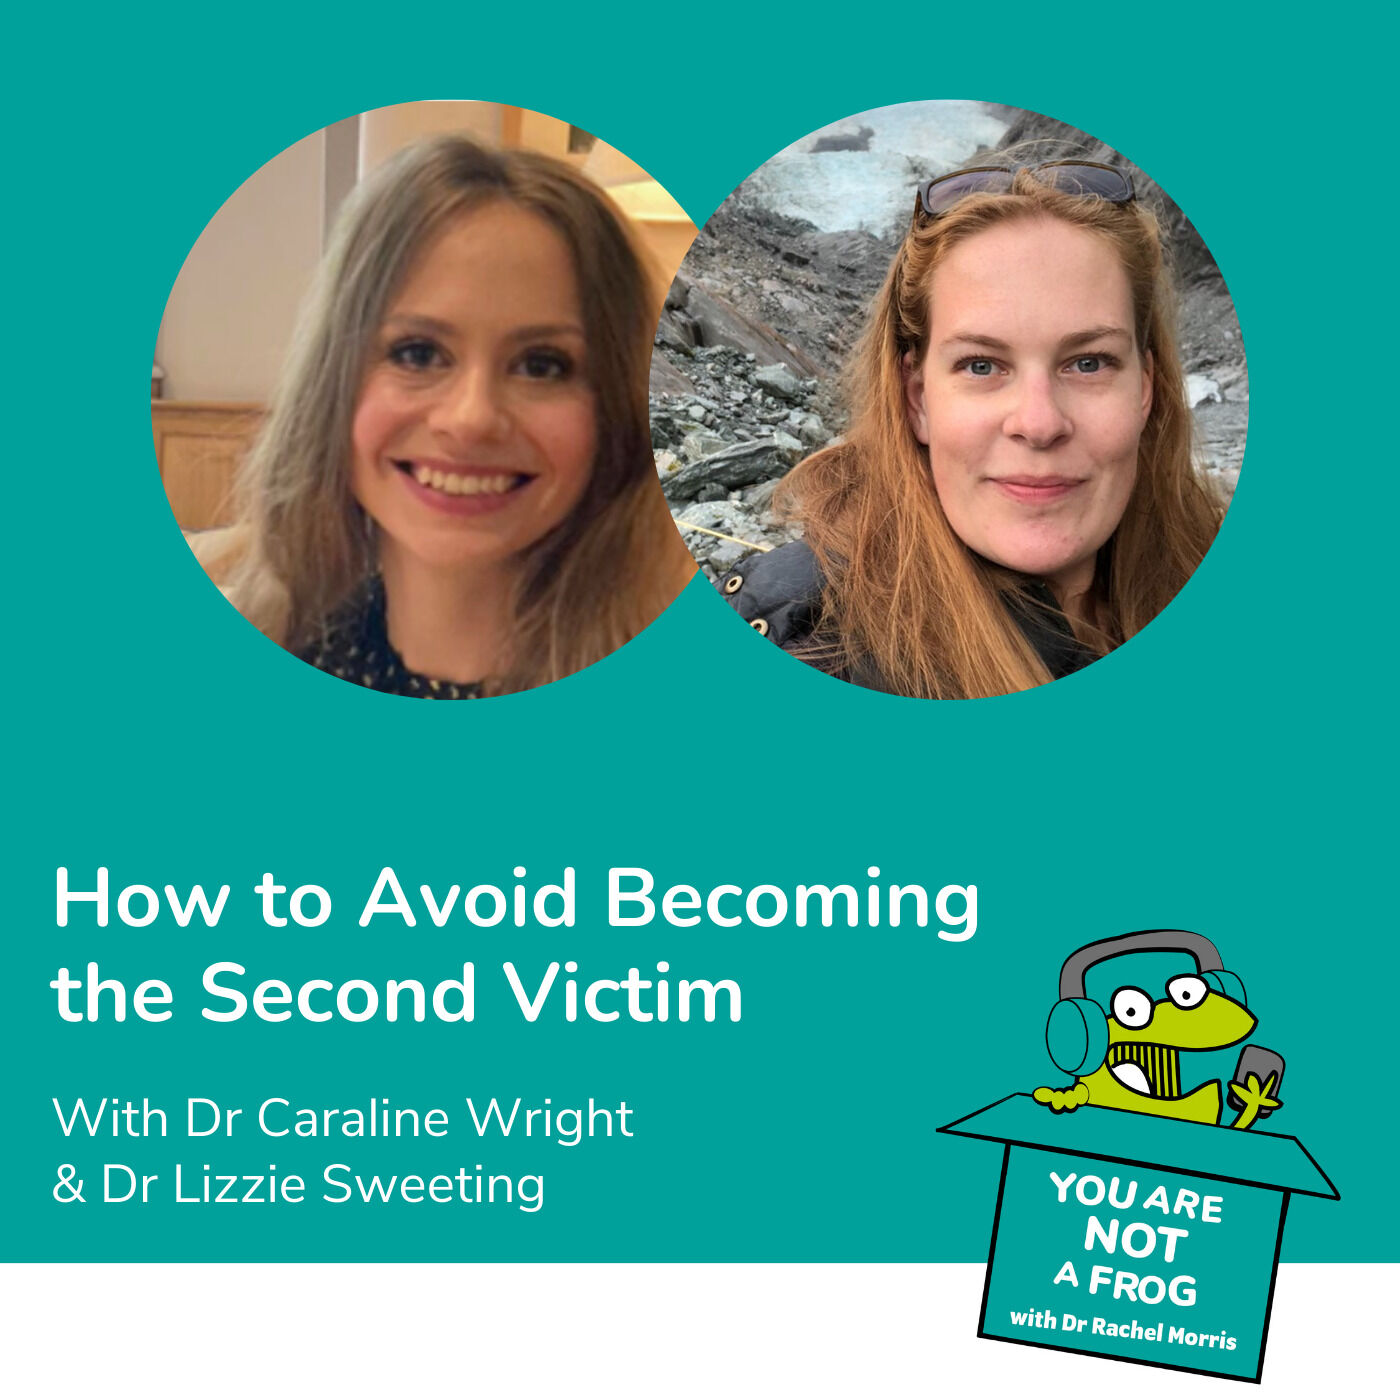 How to Avoid Becoming the Second Victim with Dr Caraline Wright & Dr Lizzie Sweeting